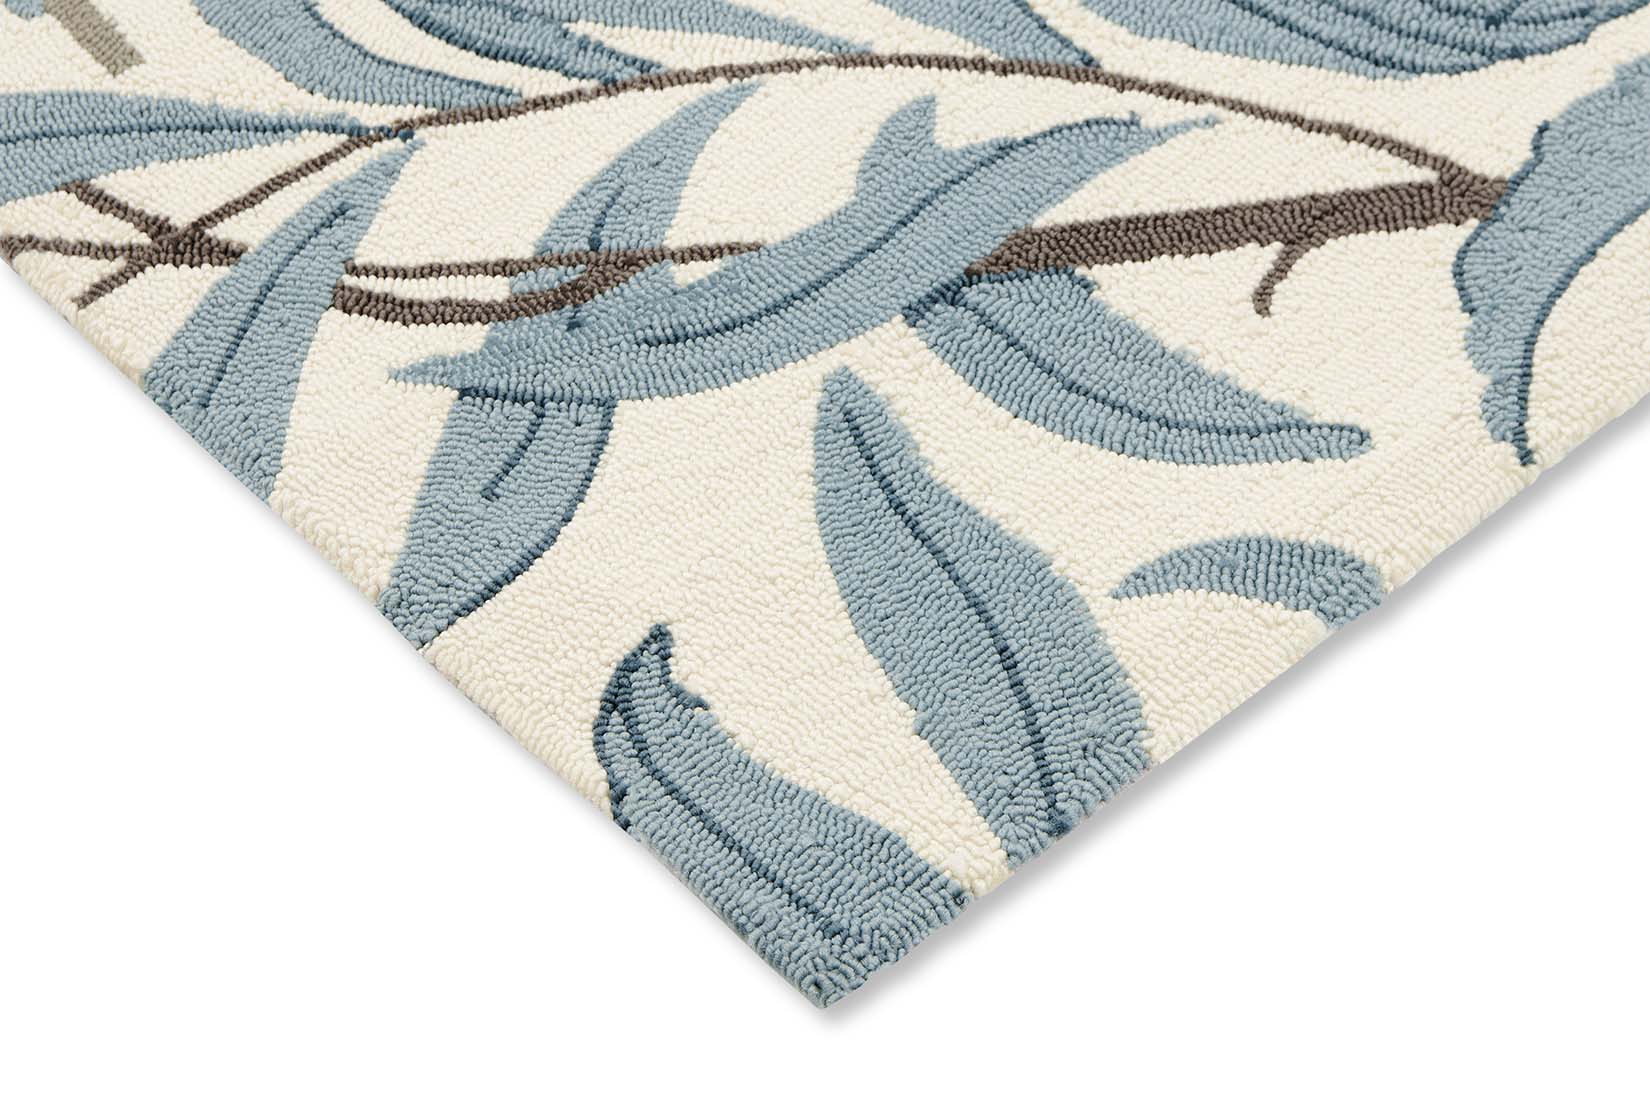 blue indoor/outdoor rug with floral pattern
